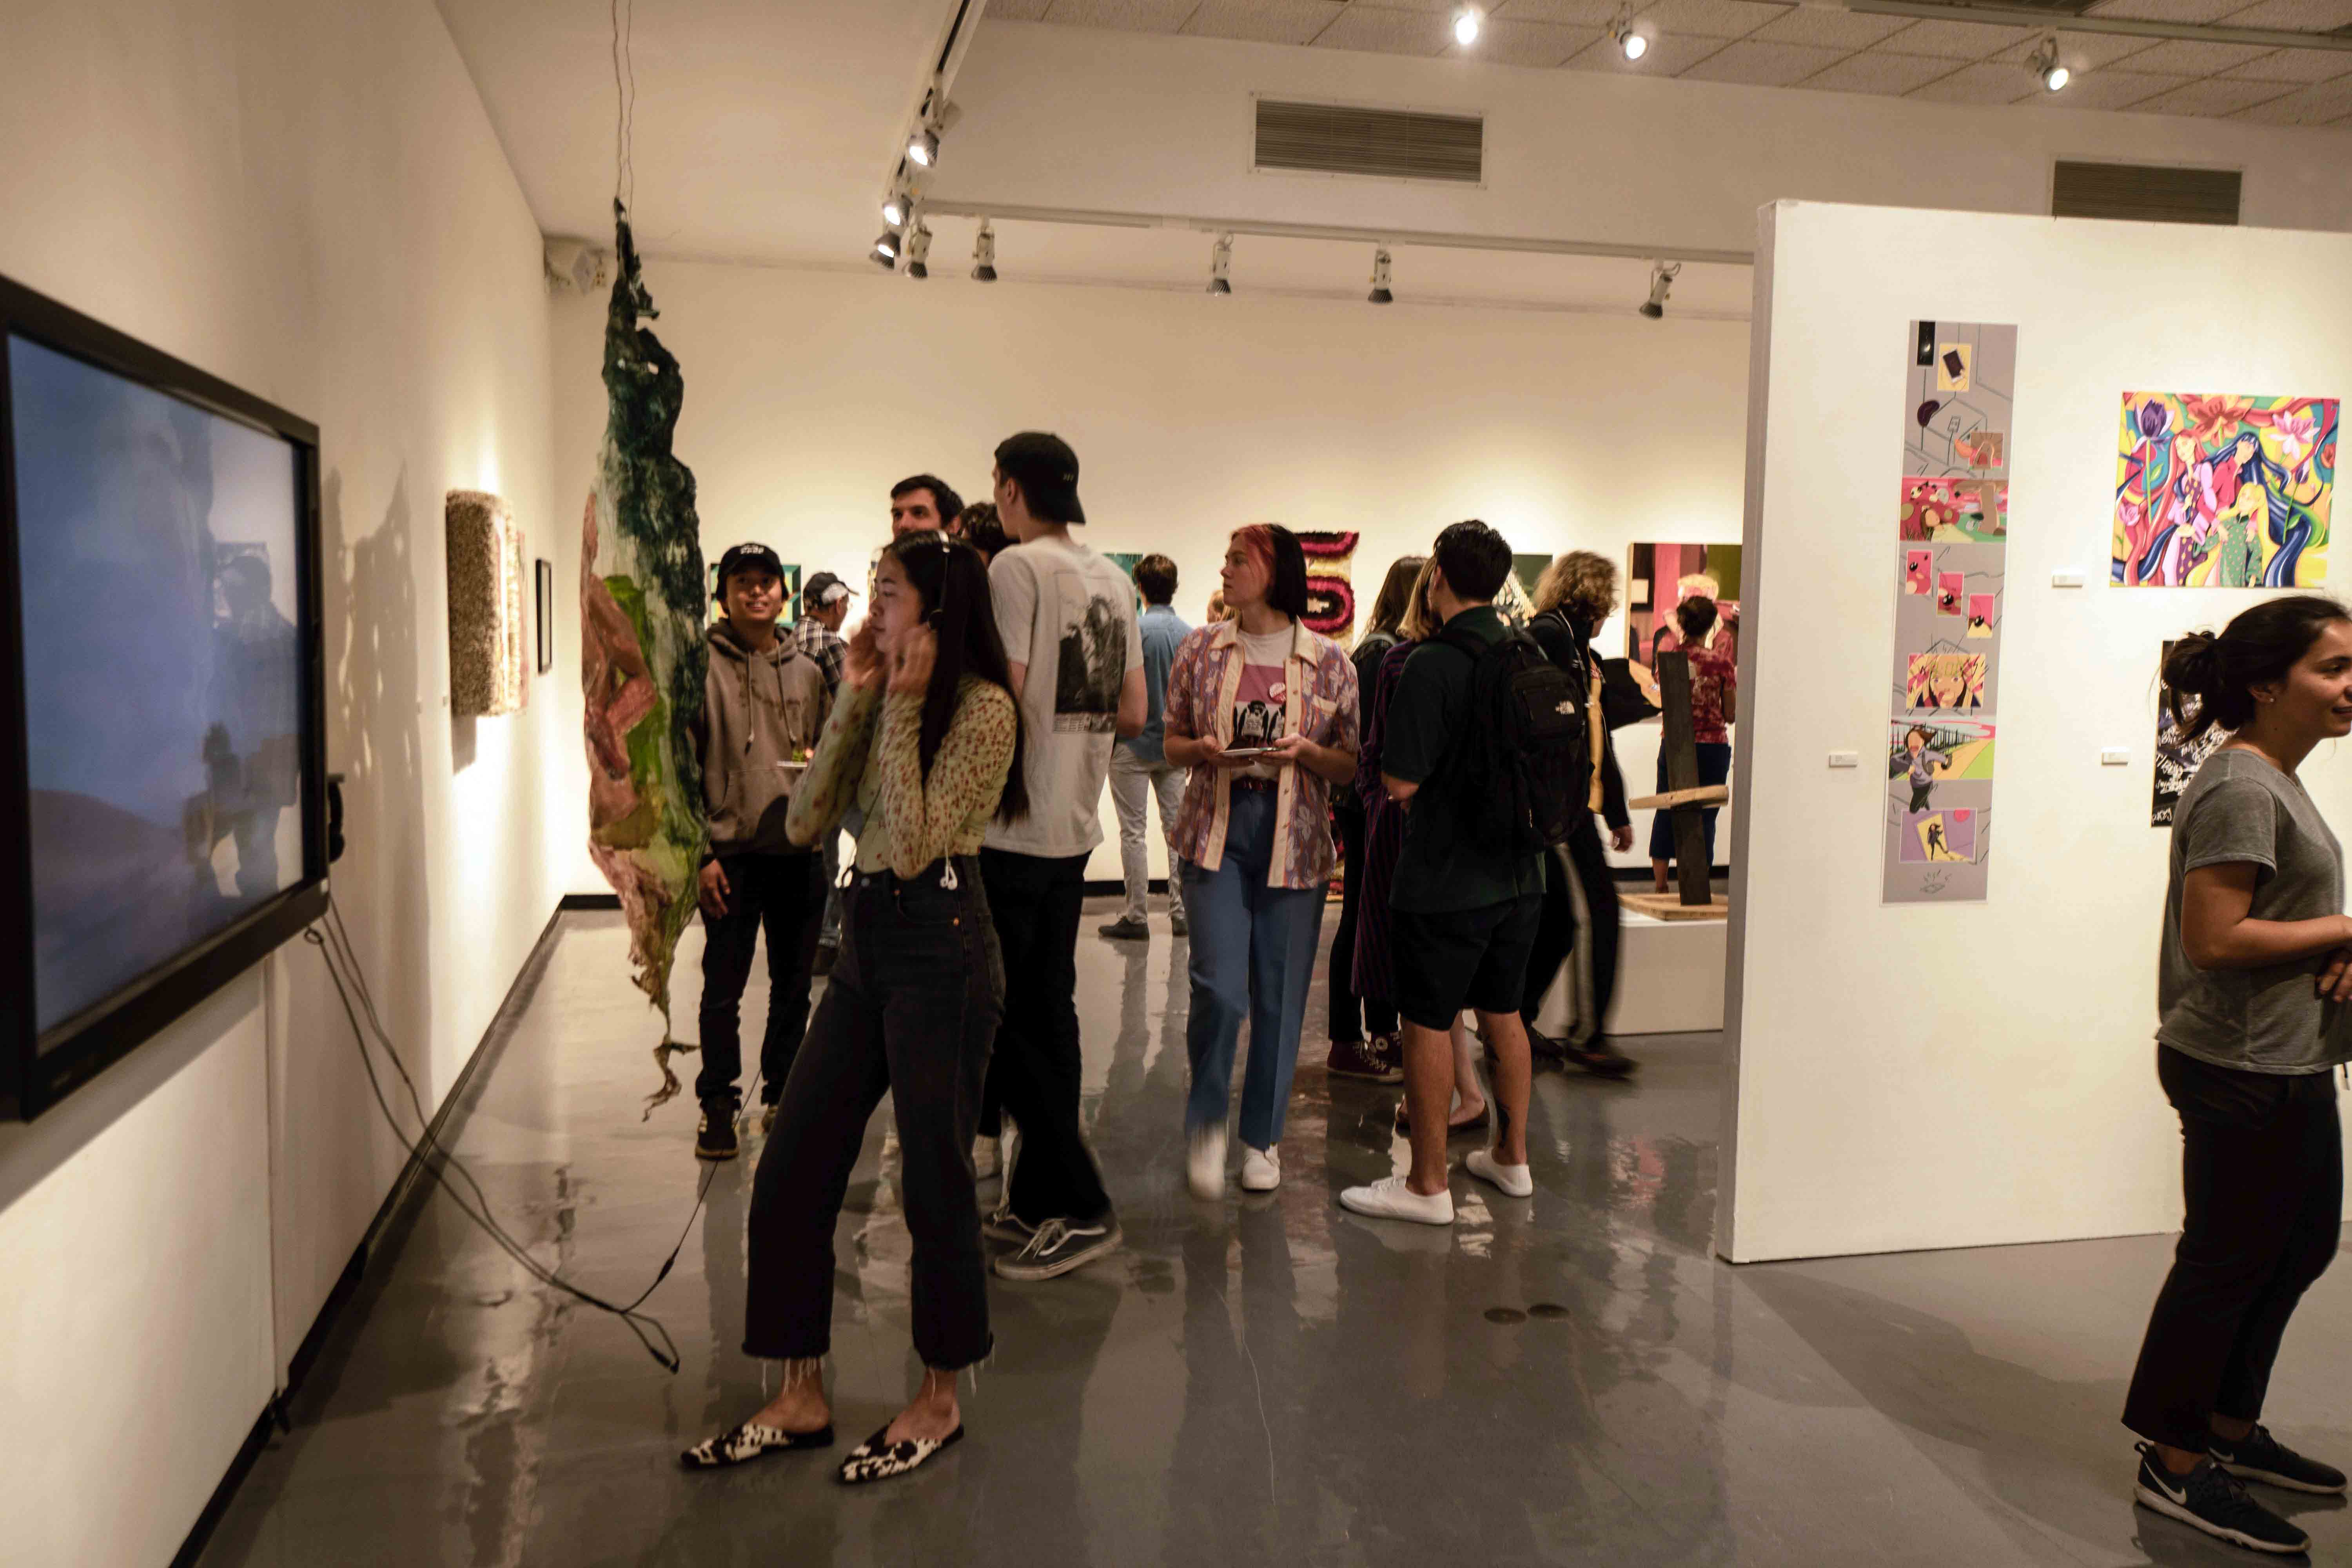 Attendees view art at the 2019 student show in the University Art Gallery.